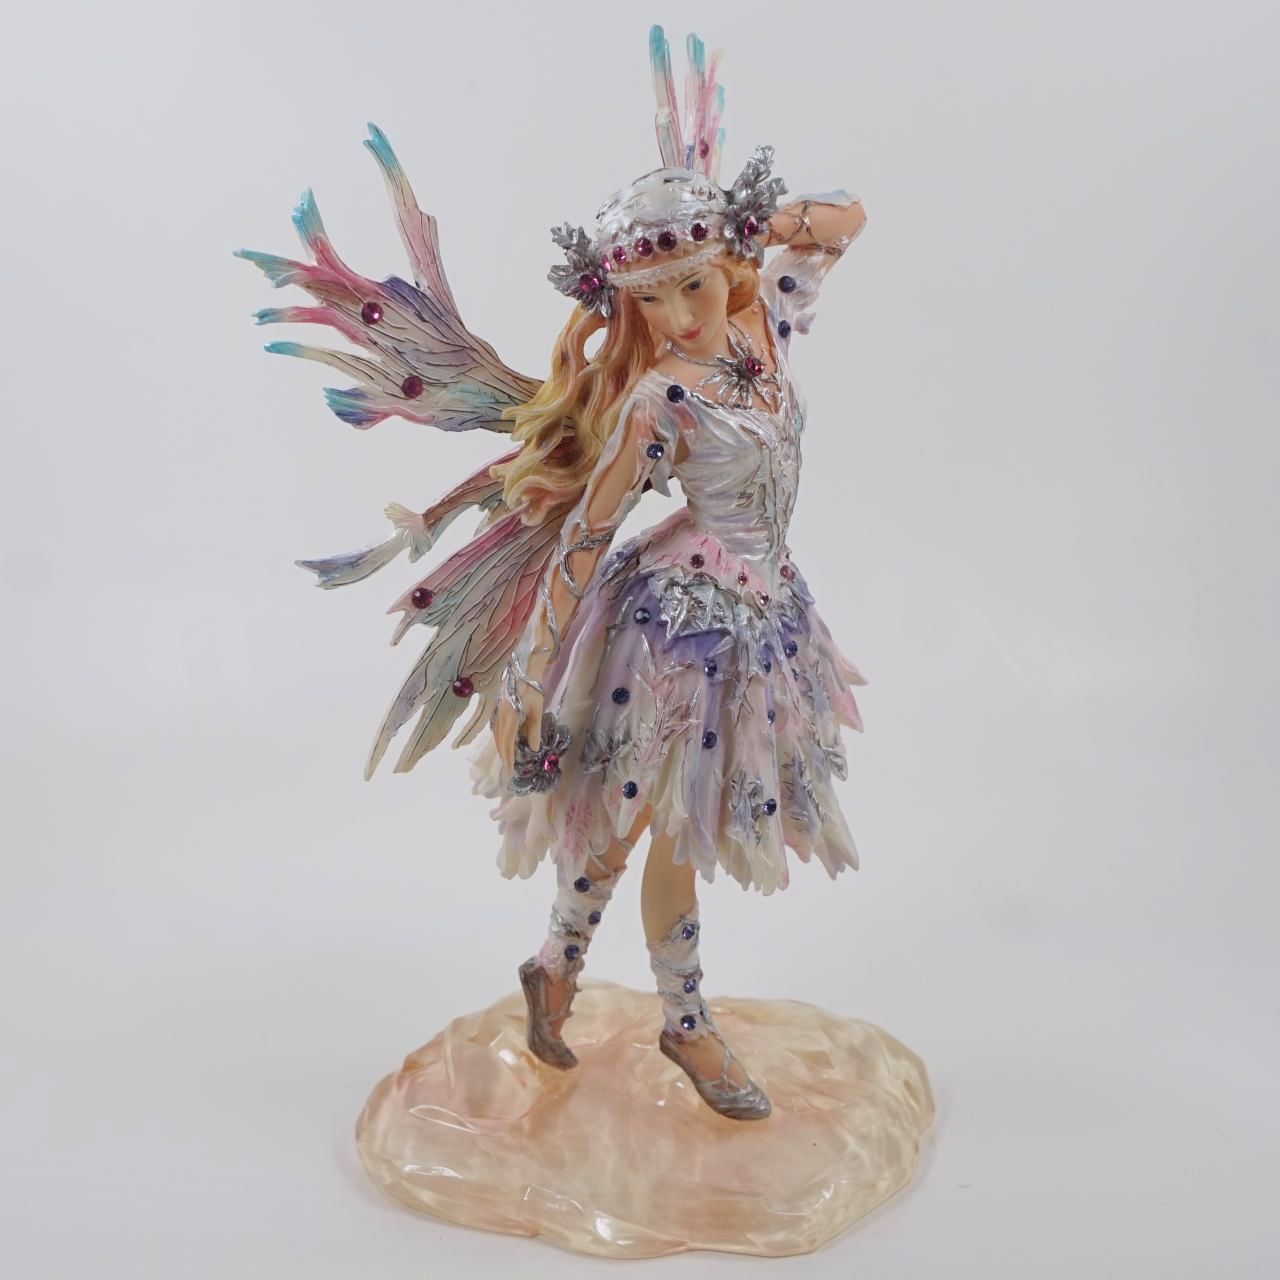 Crisalis Collection★ Ice Princess Faerie (1-5321) Signed